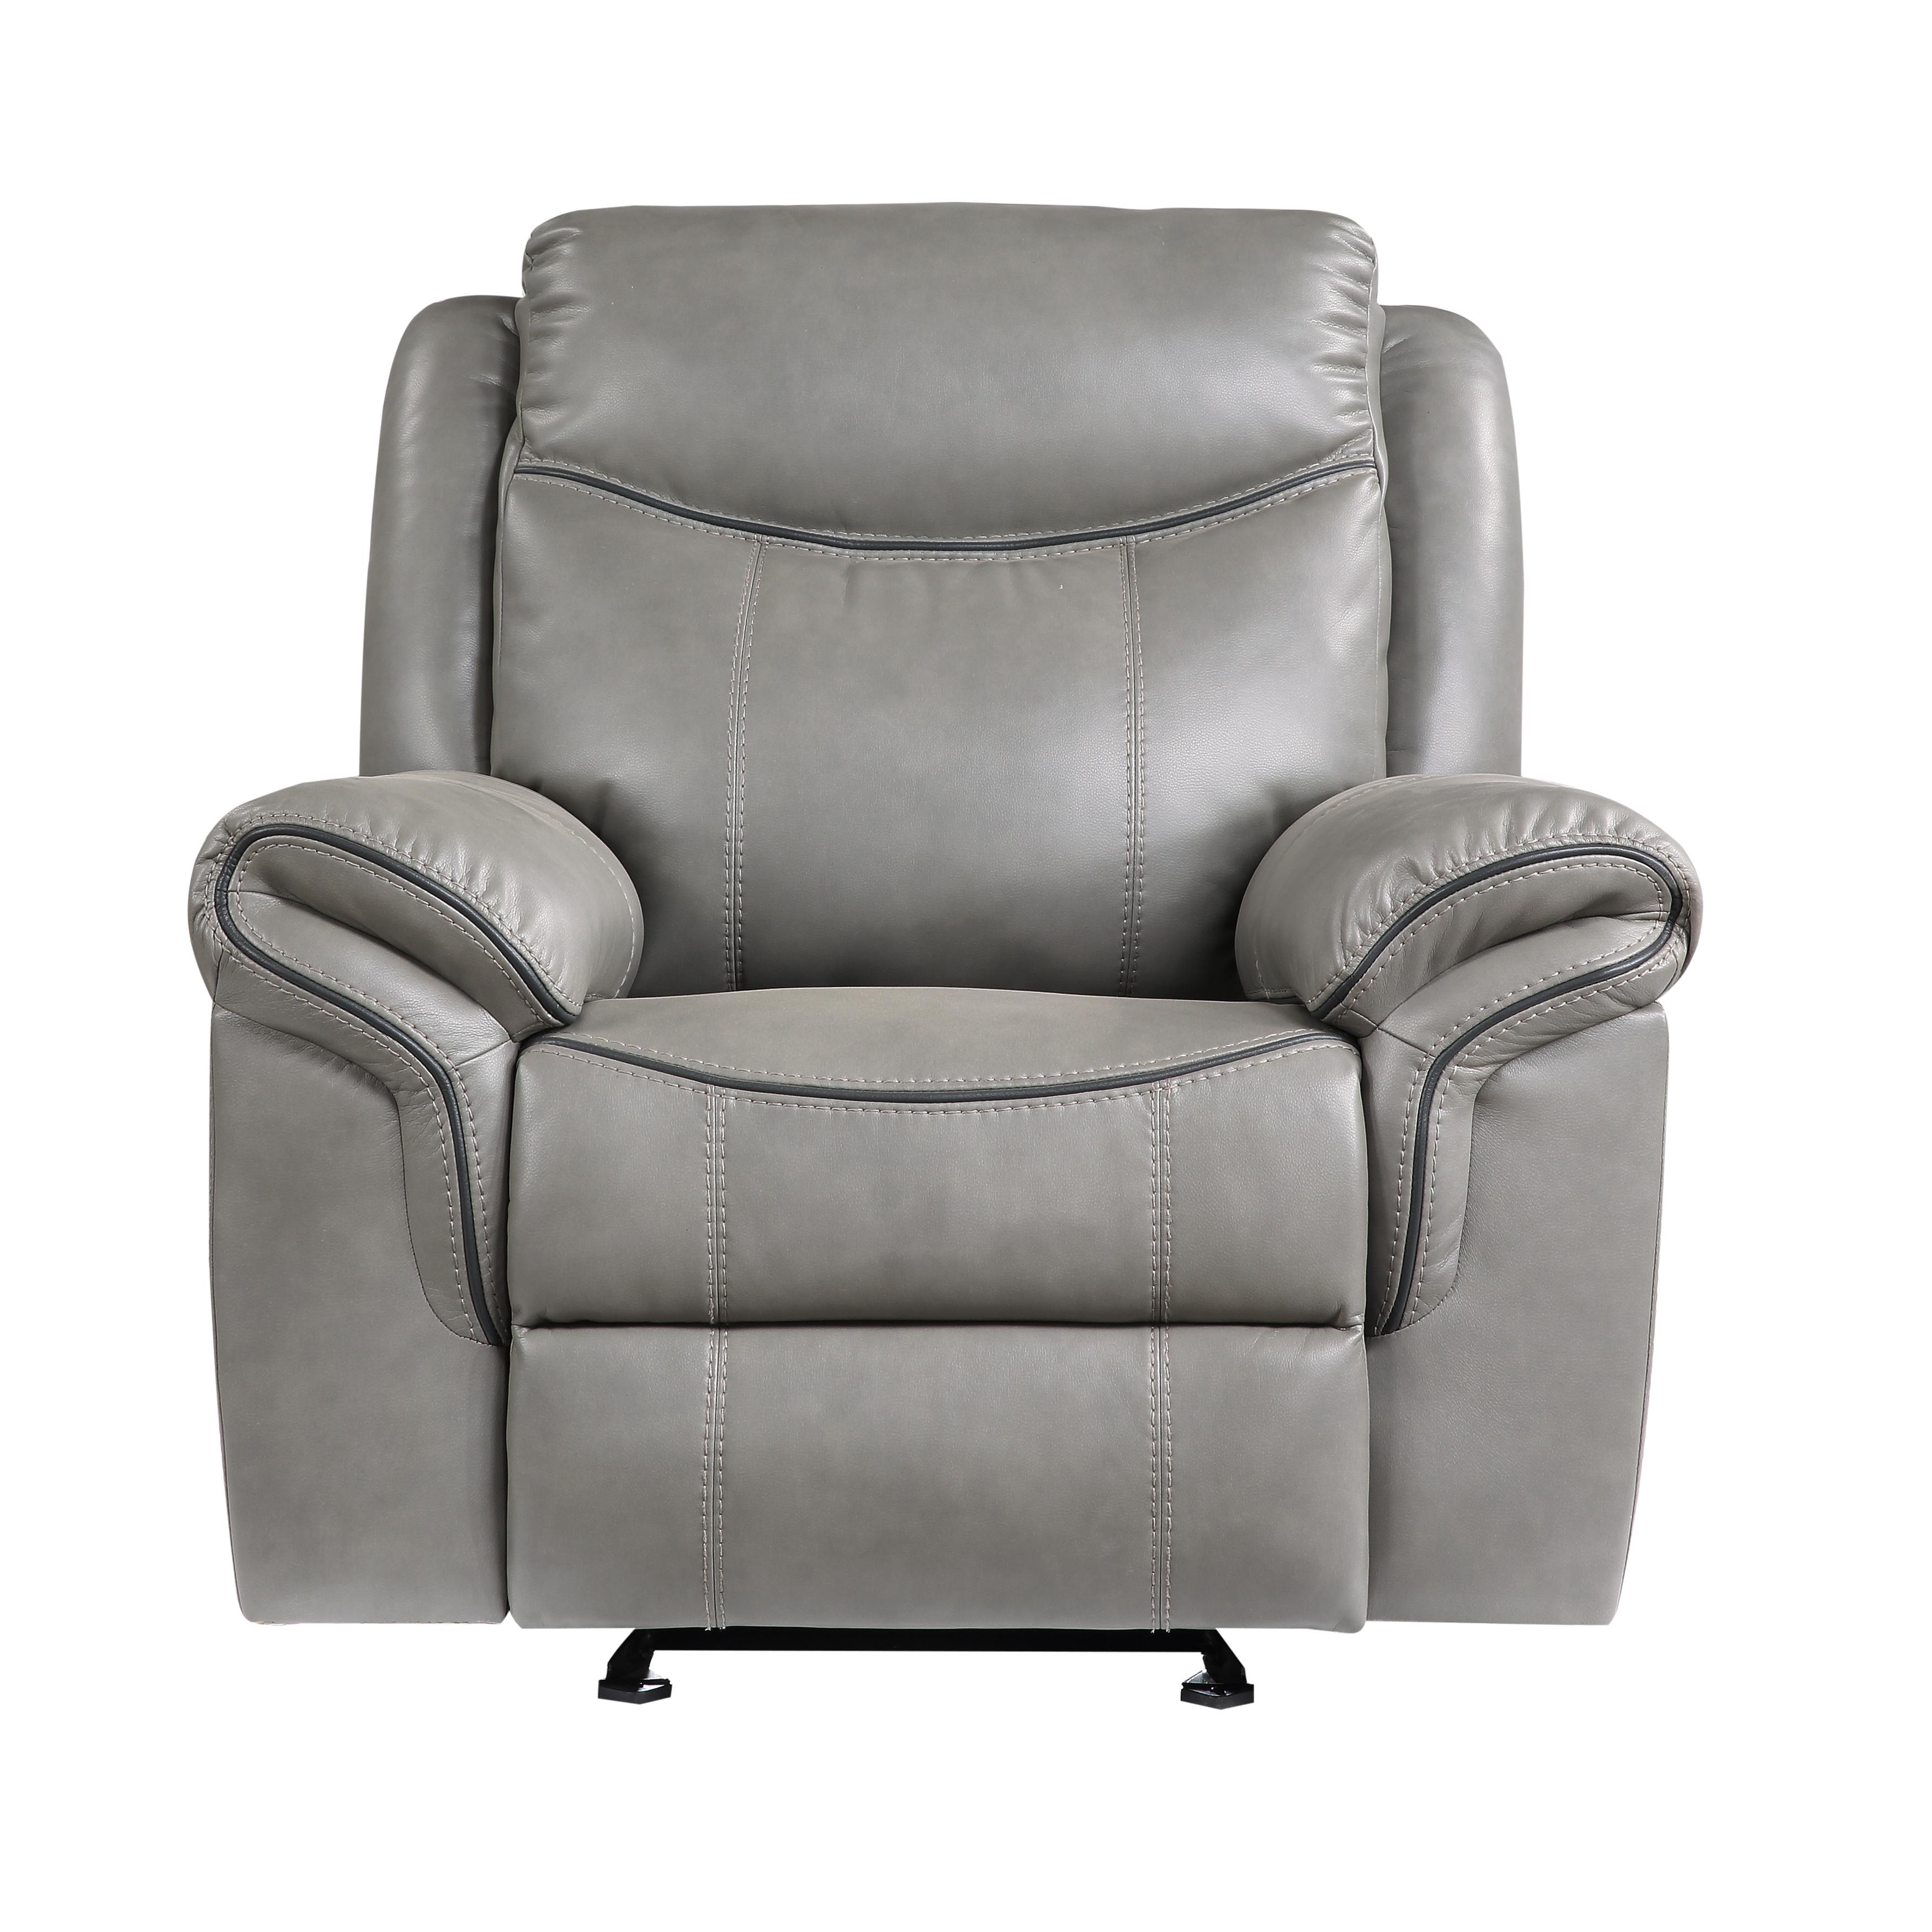 Transitional Reclining Chair 8206GRY-1 Aram 8206GRY-1 in Gray Faux Leather